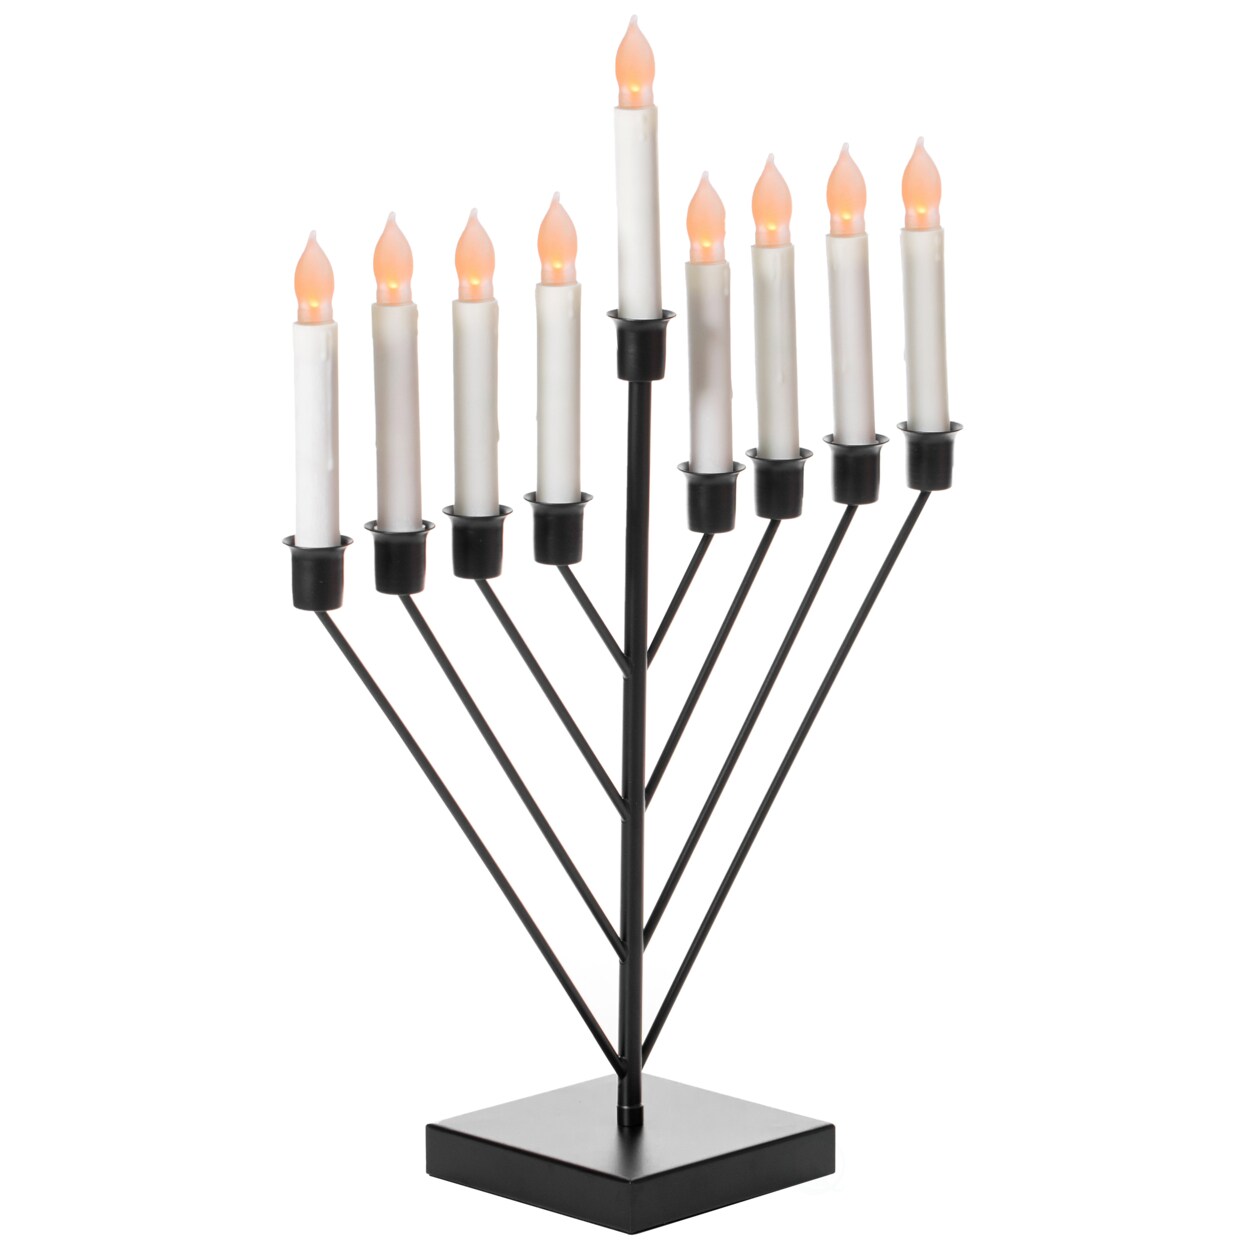 Vintiquewise Nine Branch Electric Chabad Judaica Chanukah Menorah with LED Candle Design Candlestick